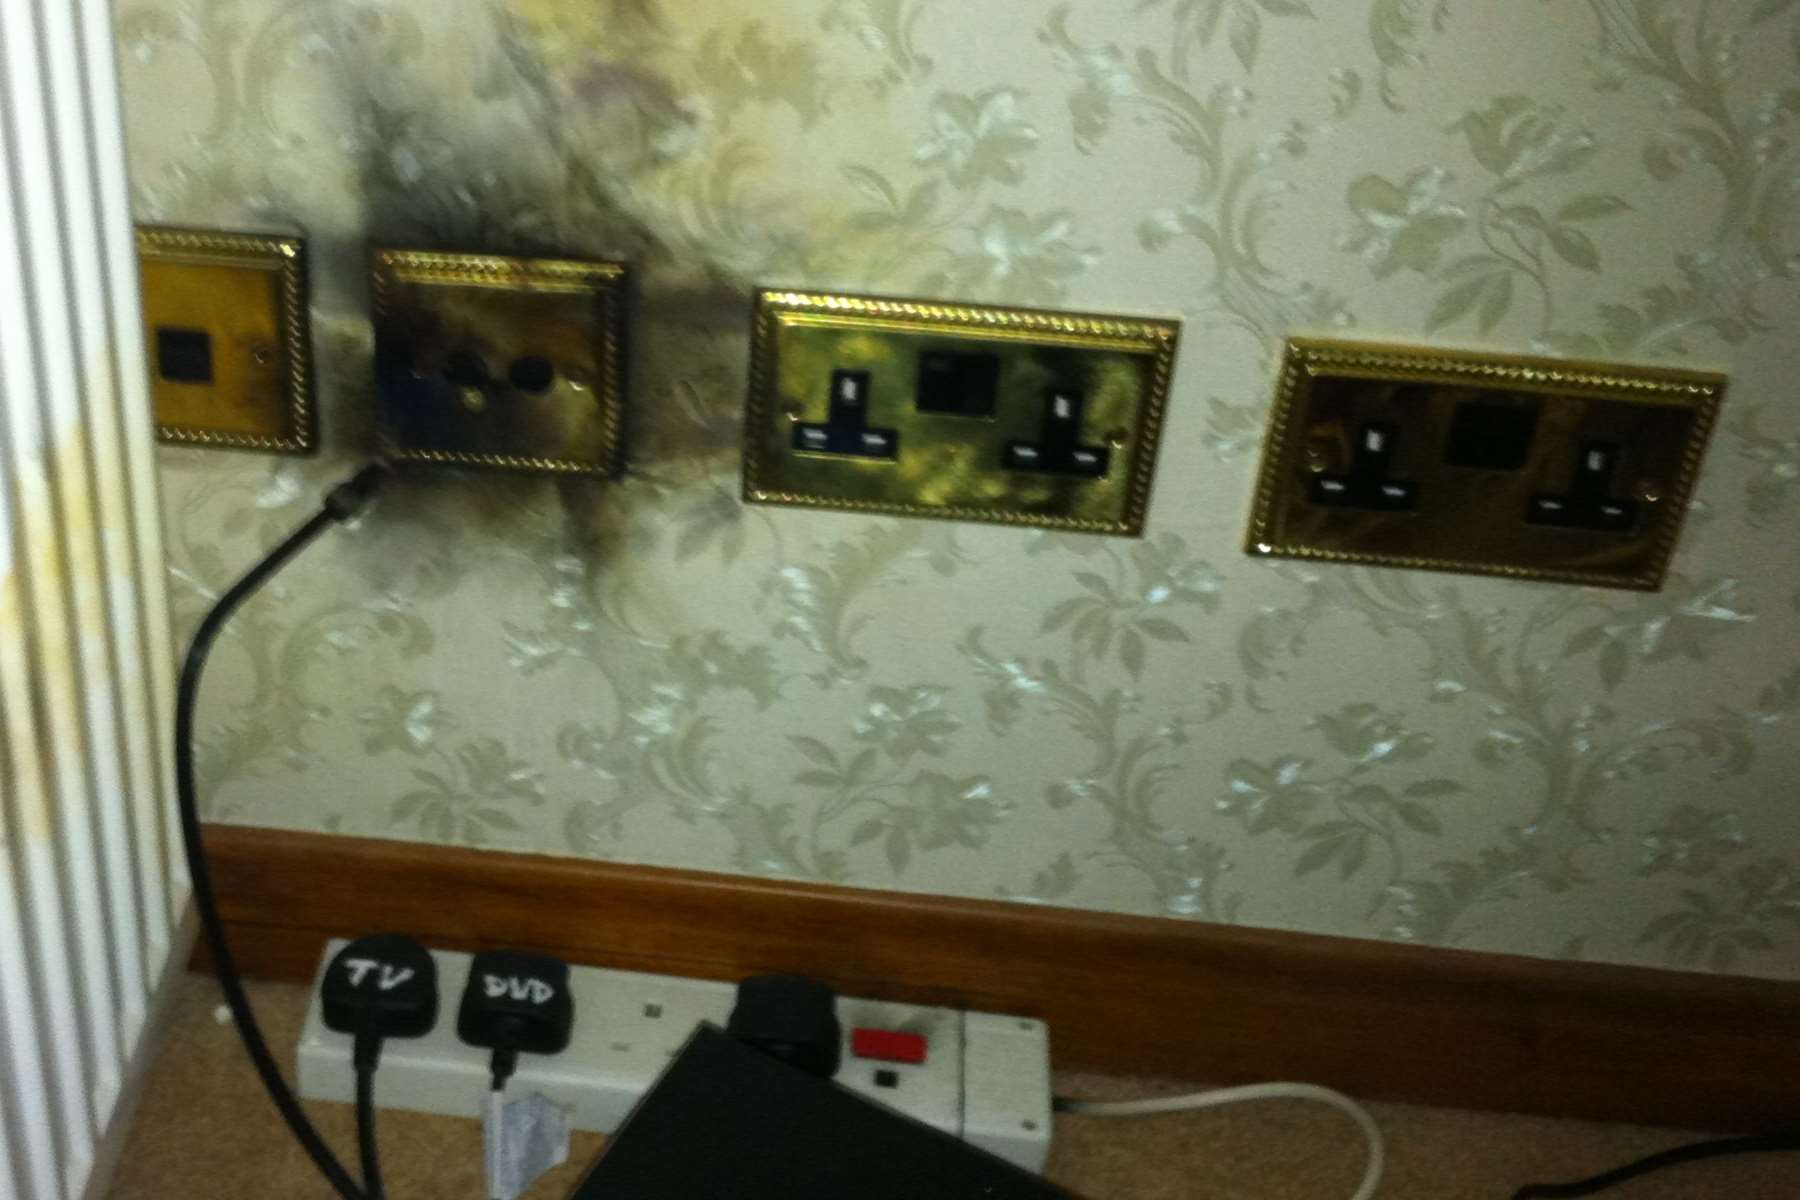 Plug sockets exploded during the storm